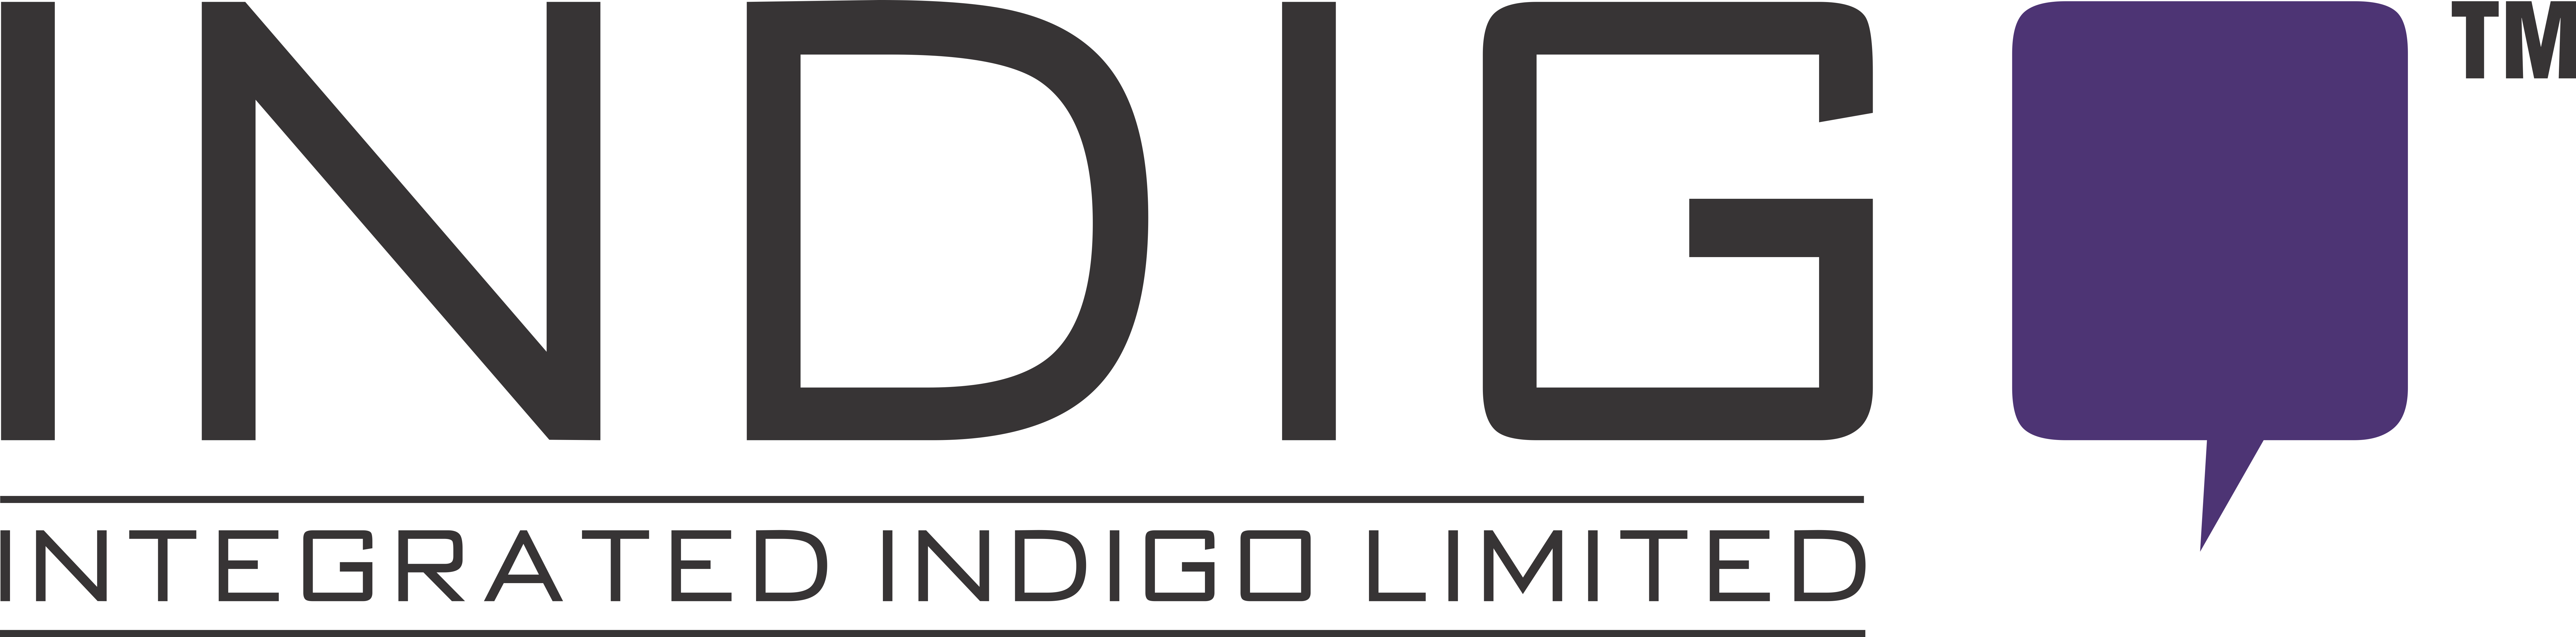 Integrated Indigo Limited | Award-winning Consulting Firm in Nigeria & Africa